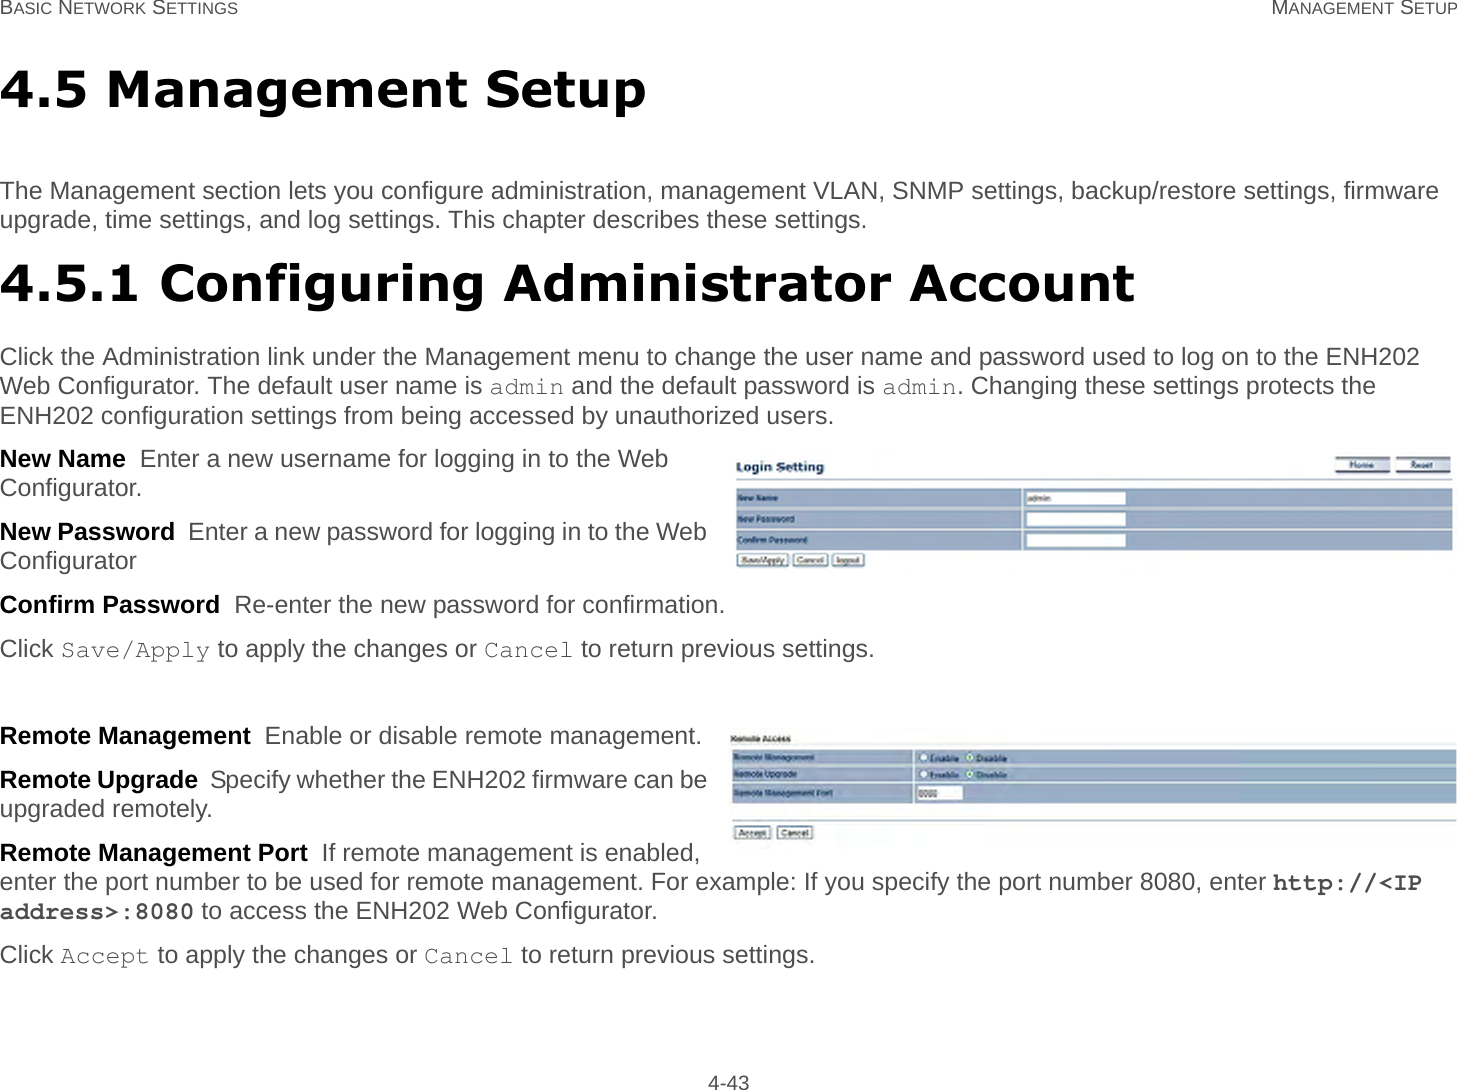 BASIC NETWORK SETTINGS MANAGEMENT SETUP 4-434.5 Management SetupThe Management section lets you configure administration, management VLAN, SNMP settings, backup/restore settings, firmware upgrade, time settings, and log settings. This chapter describes these settings.4.5.1 Configuring Administrator AccountClick the Administration link under the Management menu to change the user name and password used to log on to the ENH202 Web Configurator. The default user name is admin and the default password is admin. Changing these settings protects the ENH202 configuration settings from being accessed by unauthorized users.New Name  Enter a new username for logging in to the Web Configurator.New Password  Enter a new password for logging in to the Web ConfiguratorConfirm Password  Re-enter the new password for confirmation.Click Save/Apply to apply the changes or Cancel to return previous settings.Remote Management  Enable or disable remote management.Remote Upgrade  Specify whether the ENH202 firmware can be upgraded remotely.Remote Management Port  If remote management is enabled, enter the port number to be used for remote management. For example: If you specify the port number 8080, enter http://&lt;IP address&gt;:8080 to access the ENH202 Web Configurator.Click Accept to apply the changes or Cancel to return previous settings.